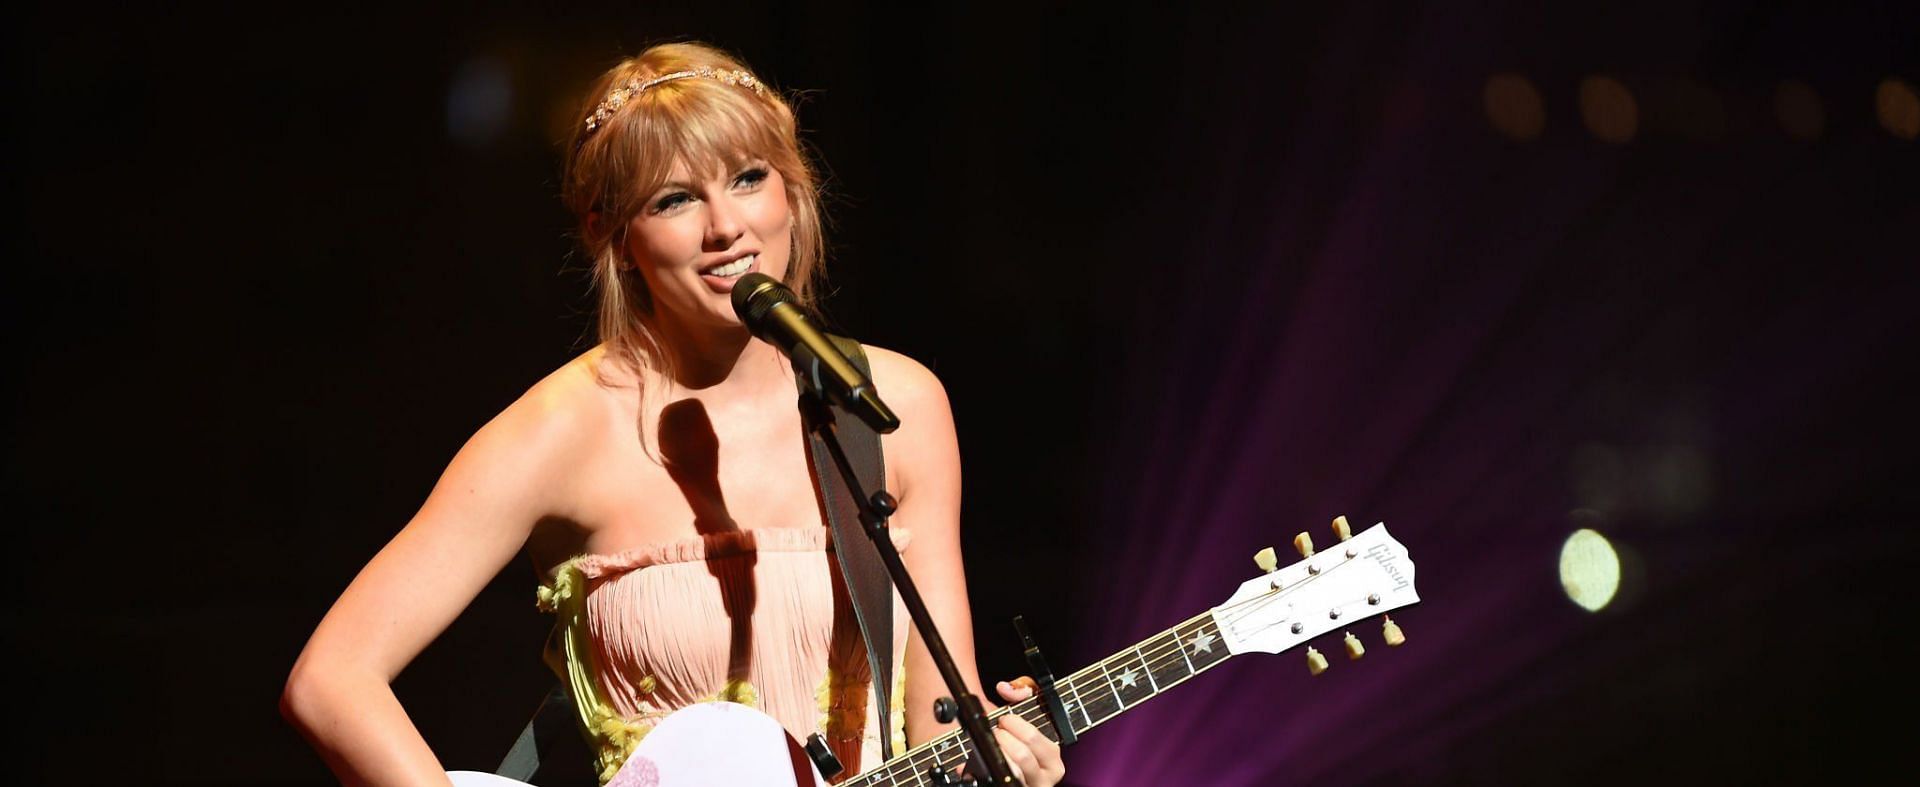 Taylor Swift opened up about her struggles with body image and eating in &#039;Miss Americana&#039; (Image via Getty Images)